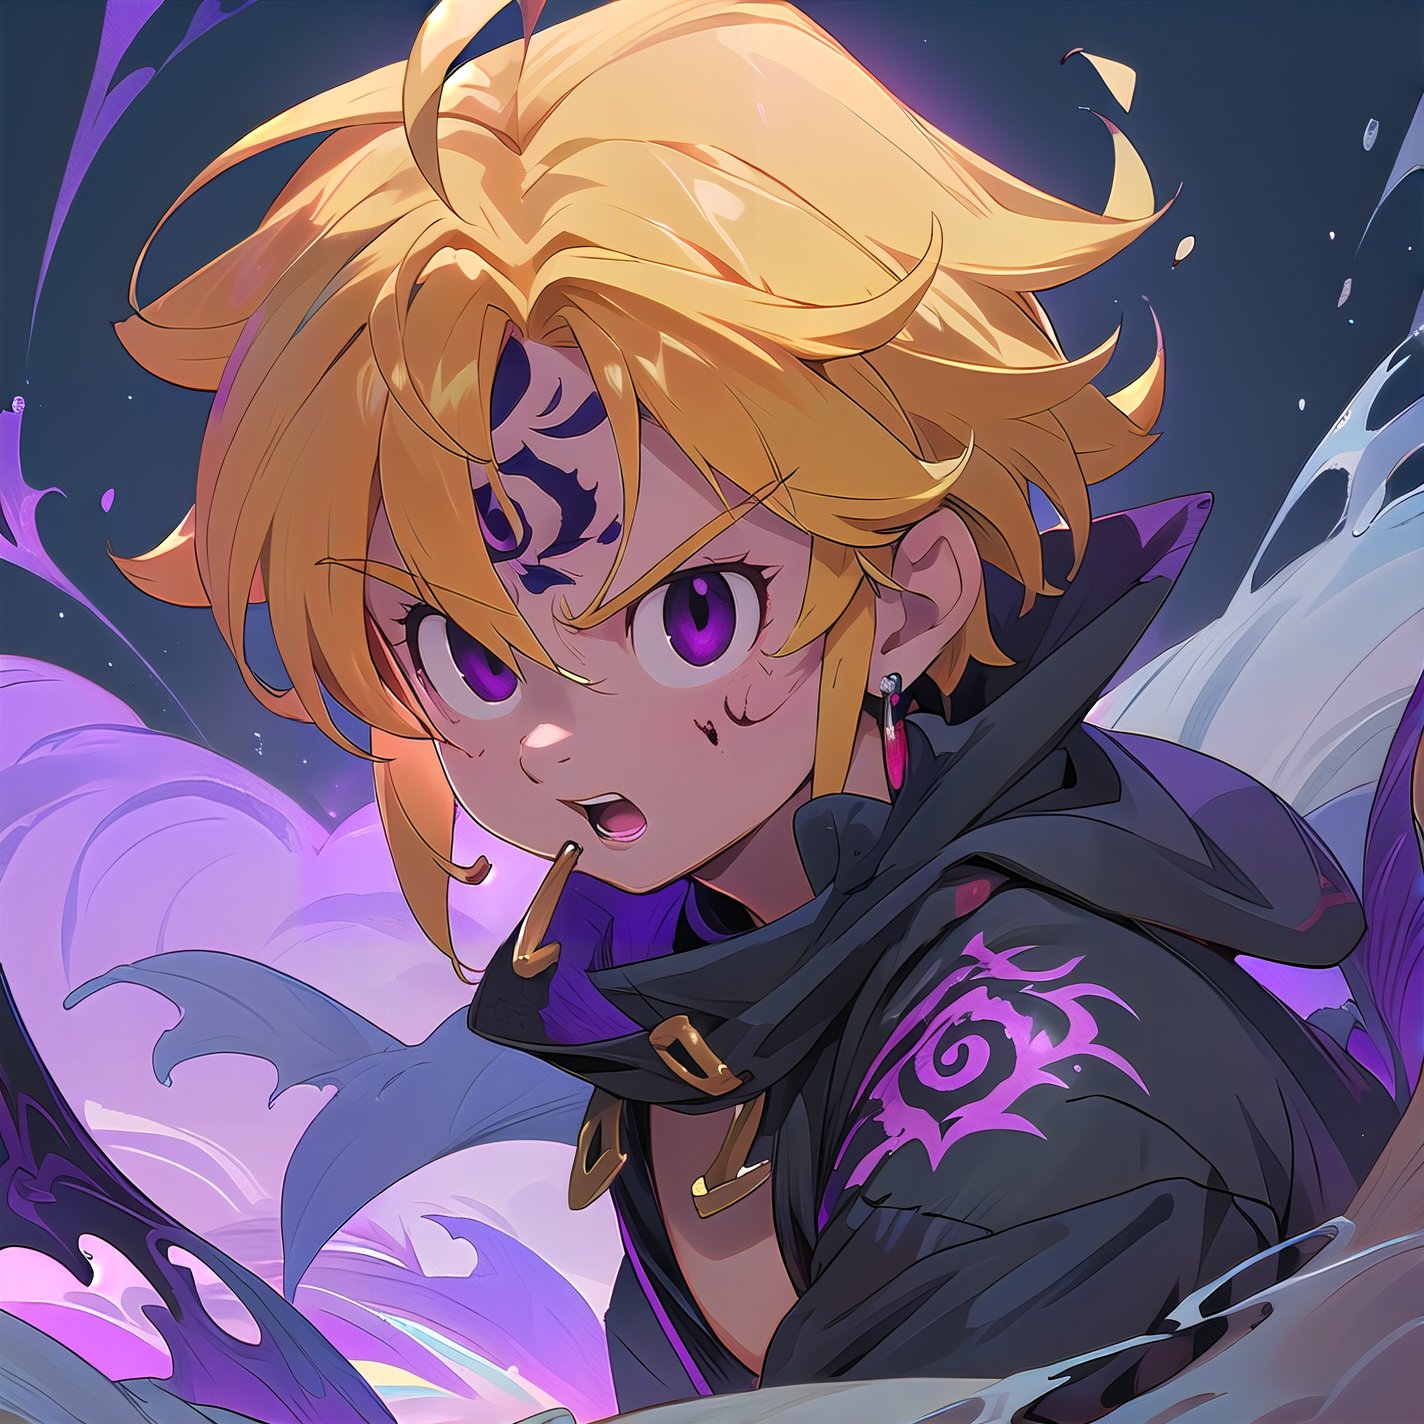 solo, male, depth of field, ((masterpiece, best quality)), demon, evil, The left part of the body is made of purple energy, purple aura, meliodas_nanatsu_no_taizai,blonde hair, empty eyes, fantasy world in background, meliodas in demon form, Blood coming from his mouth, Purple tattoo on his forehead, black eyes,EnvyBeautyMix23